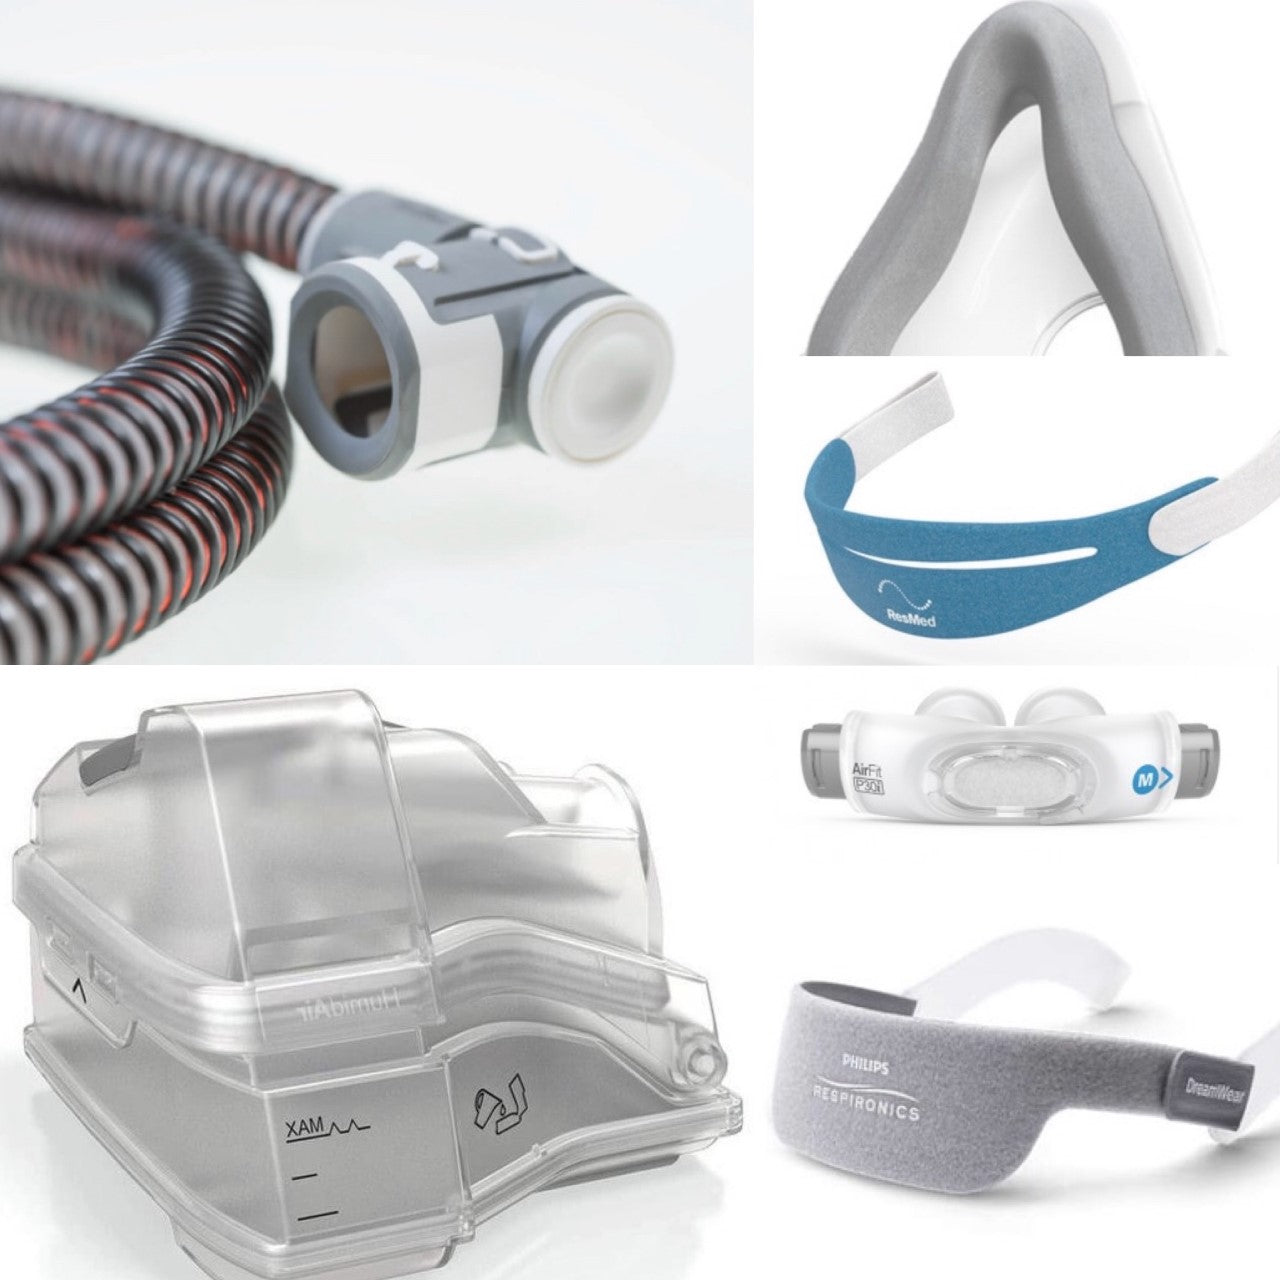 Replacing Your CPAP Equipment? Join The MySupply Program